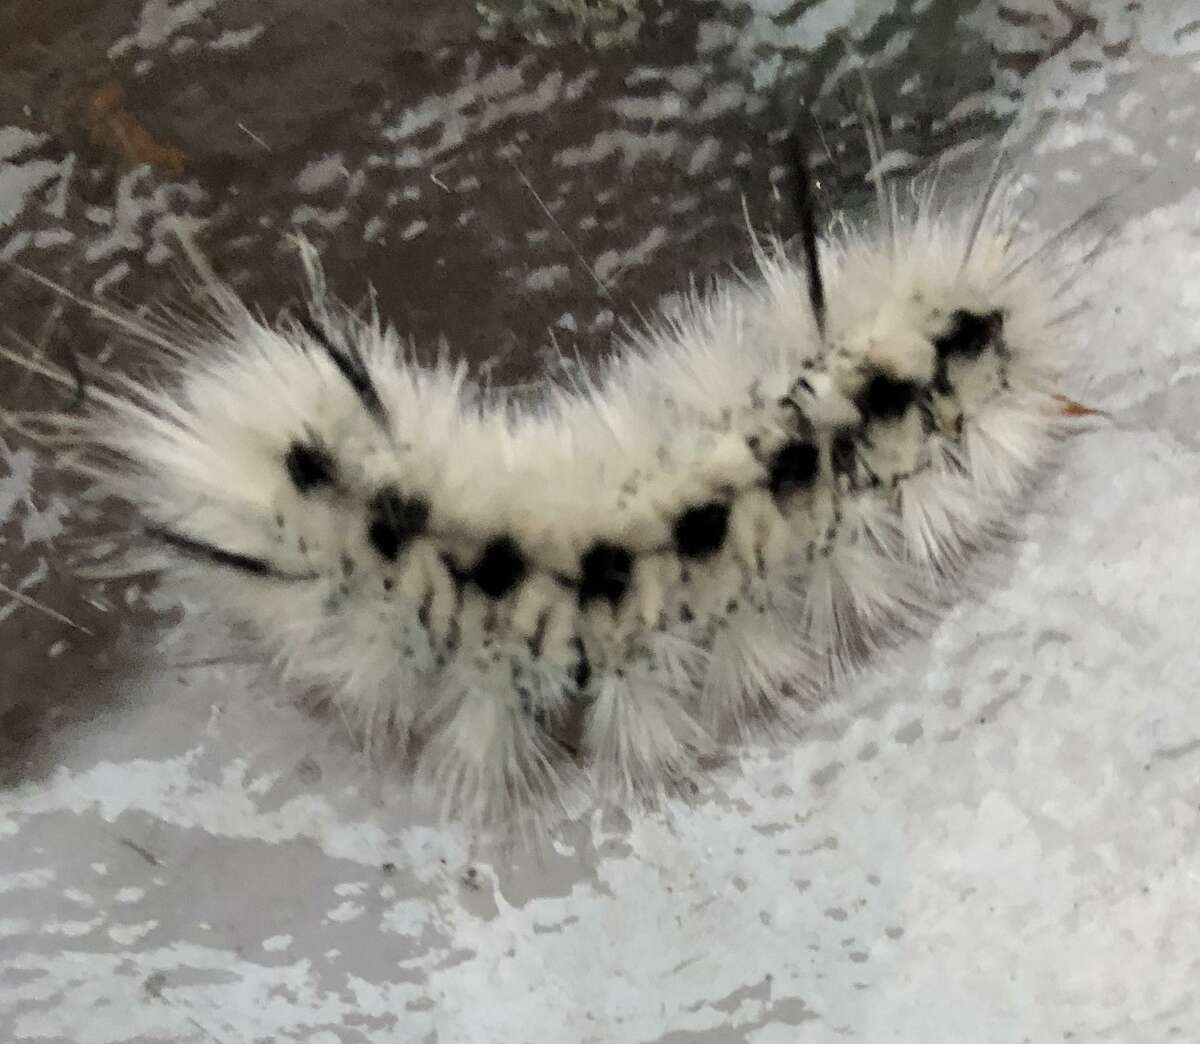 The Black and White Furry Caterpillar, also known as the Lophocampa caryae, is actually the larval form of the Hickory Tussock Moth. Originally found in Canada, these insects have made their way southwards into the New England and Mid-atlantic regions. Appearing most commonly during the summer and early fall months, the insect can be found eating the leaves of several tree and plant species.